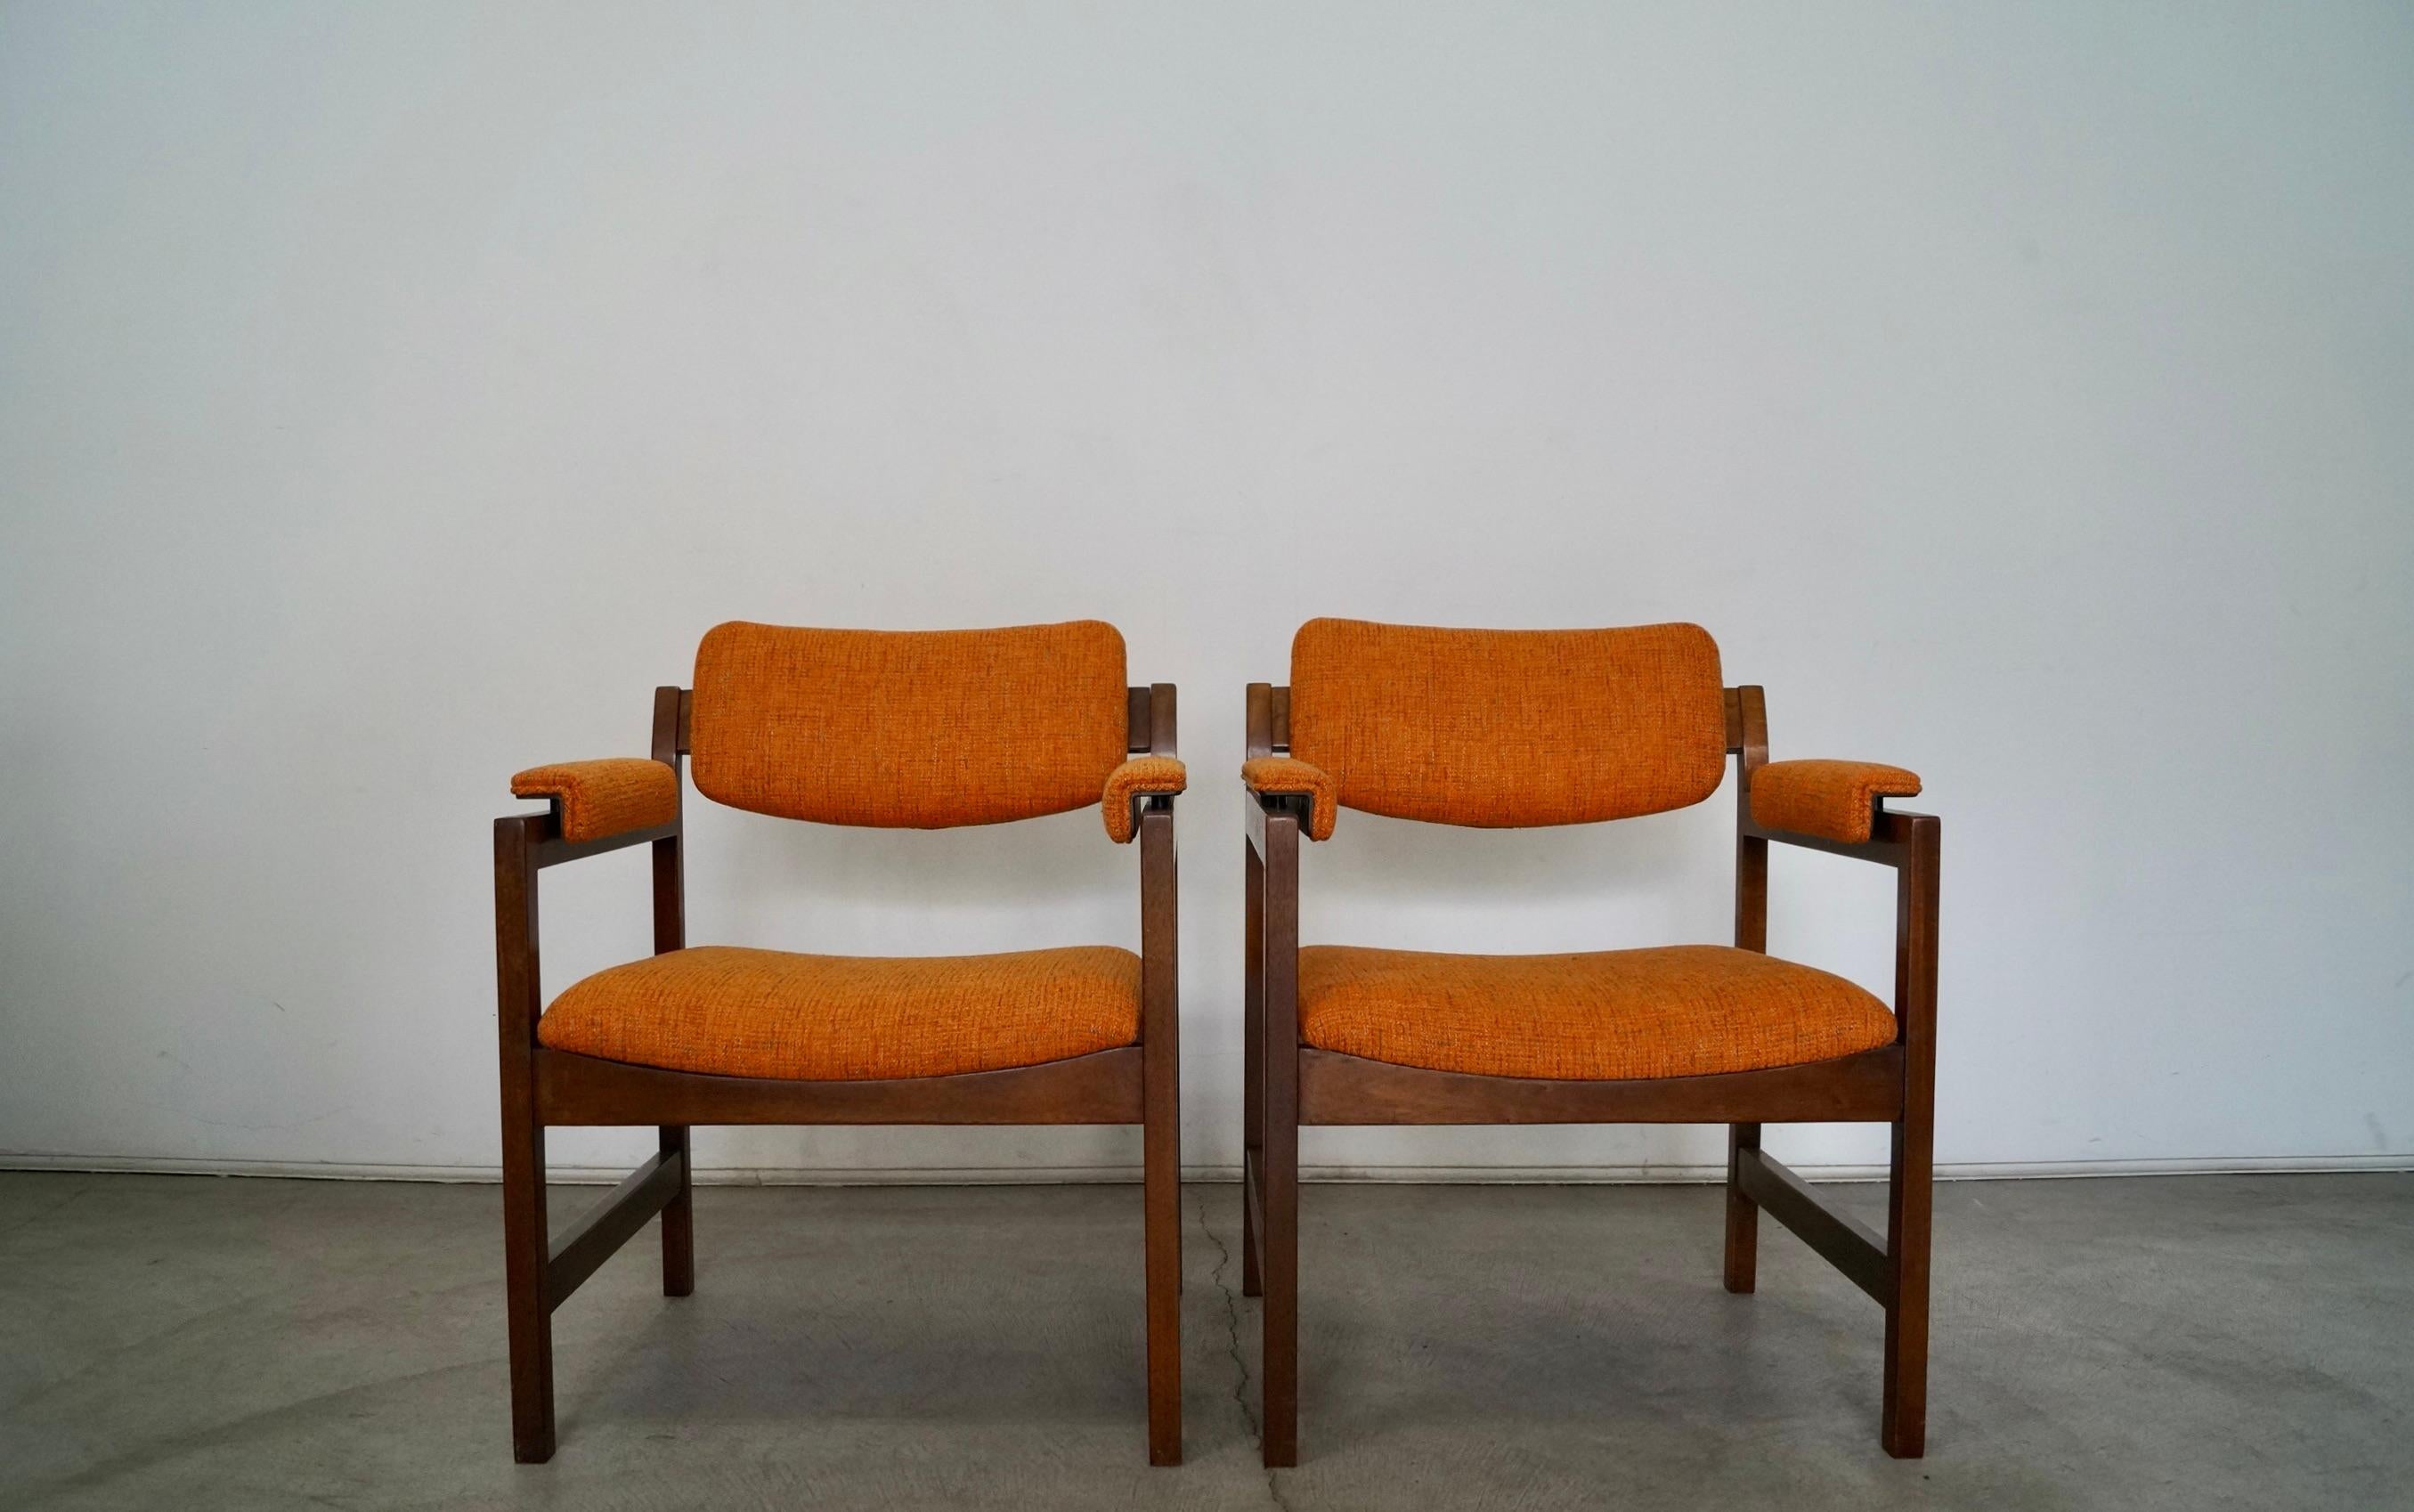 Vintage 1960s Mid-Century Modern pair of armchairs for sale. The frames are solid mahogany in a walnut finish, and they have been reupholstered in new fabric and foam. The fabric we selected is Knoll Textiles Diva line in Saffron that goes for